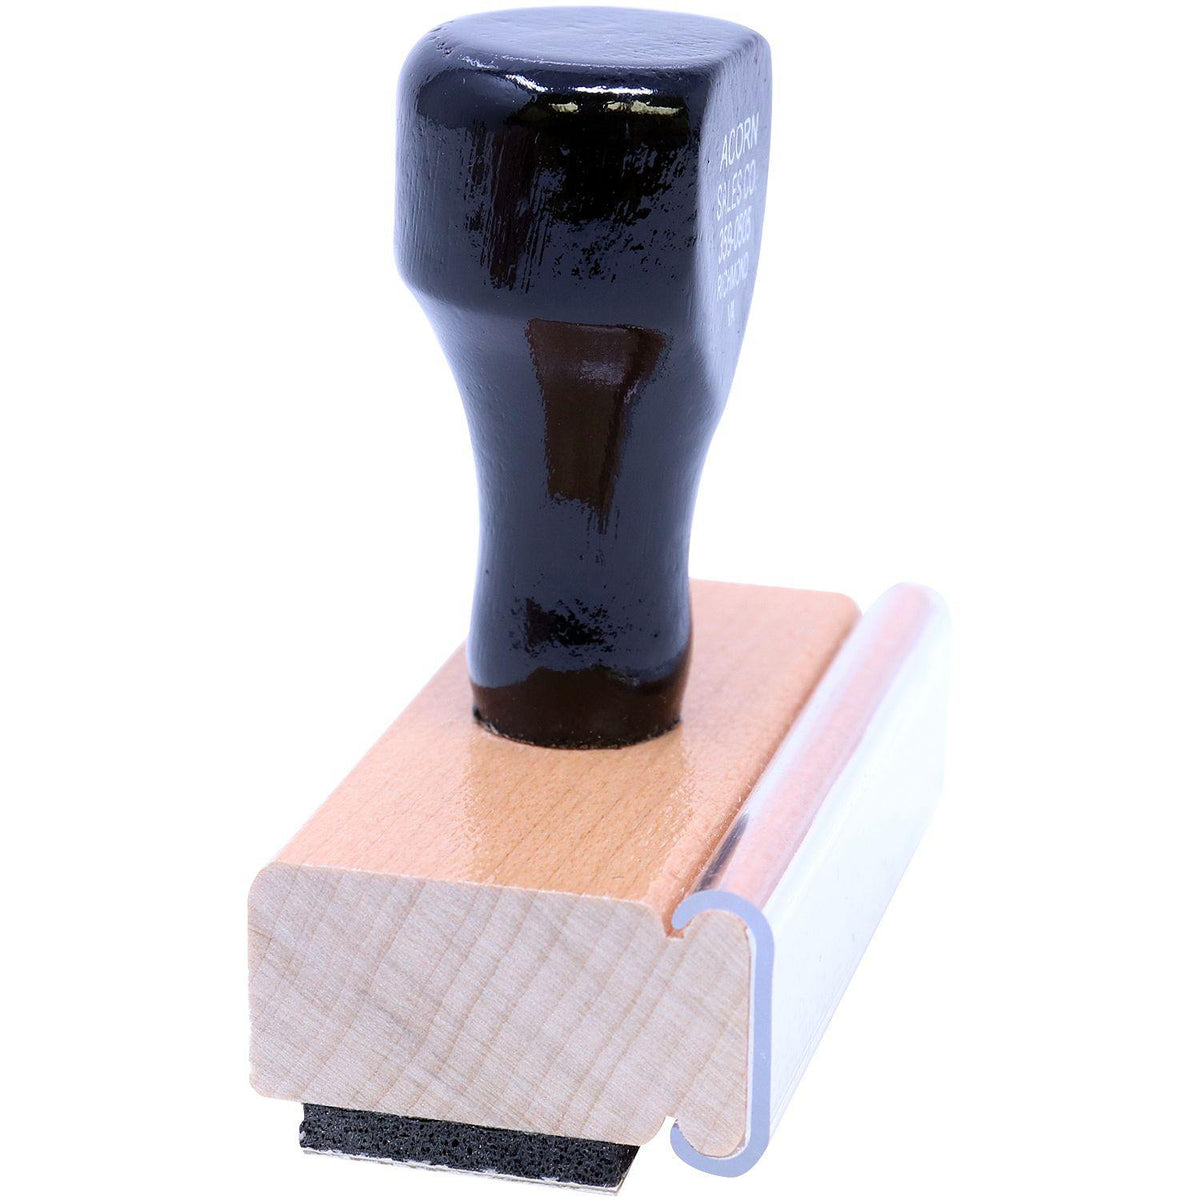 Side View of Large Redo In Pen And Turn Back In Rubber Stamp at an Angle